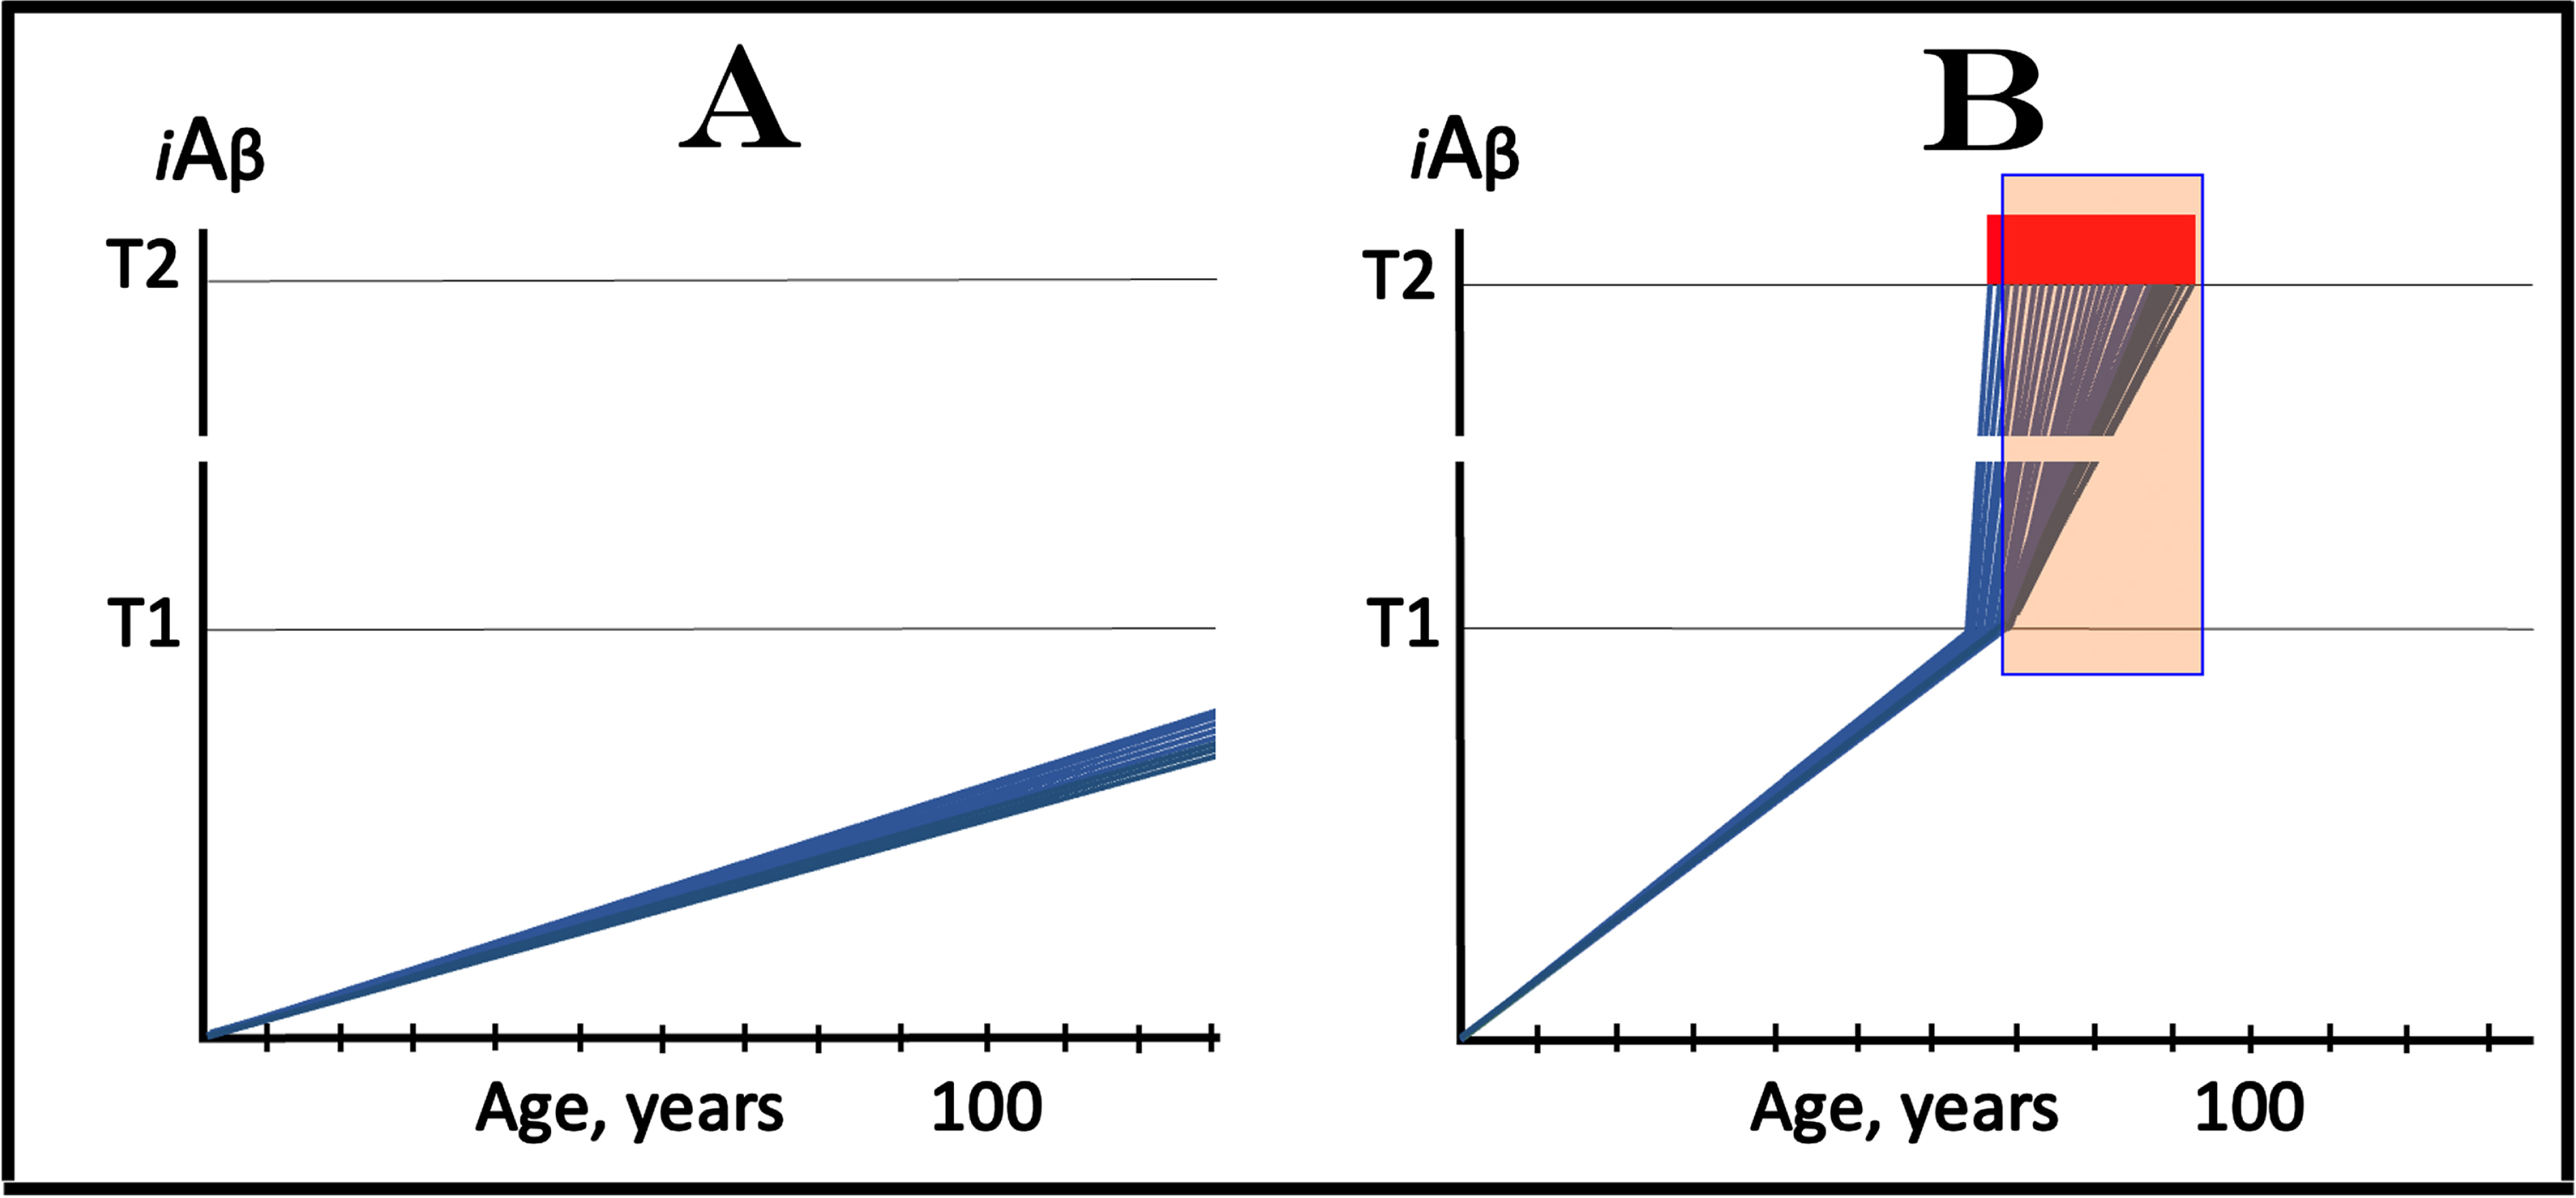 T1 threshold arbitrates between health and disease: AD is defined by the dynamics of iAβ accumulation. Blue lines: Levels of iAβ in individual AD-affected neurons. Threshold T1: The level of AβPP-derived iAβ that triggers cellular processes resulting in the activation of the AβPP-independent generation of iAβ. Threshold T2: The level of iAβ and the consequent degree of neurodegeneration causing cellular commitment to apoptosis and acute AD symptoms. Red blocks: Apoptotic zone. Panel A: Levels of iAβ do not reach the T1 threshold within the lifetime of an individual; no AD occurs. Panel B: the neuronal crossing of the T1 threshold occurs within a narrow time window. Subsequent to the crossing of the T1 threshold, the AβPP-independent iAβ generation pathway is activated, the rate of iAβ accumulation is sharply elevated and its levels advance toward and cross the T2 threshold in a broad stochastic distribution; the temporal duration of this distribution determines the duration of the disease. Orange field: A zone where drugs targeting the influx of AβPP-derived iAβ would have no effect on the disease. For details see main text.